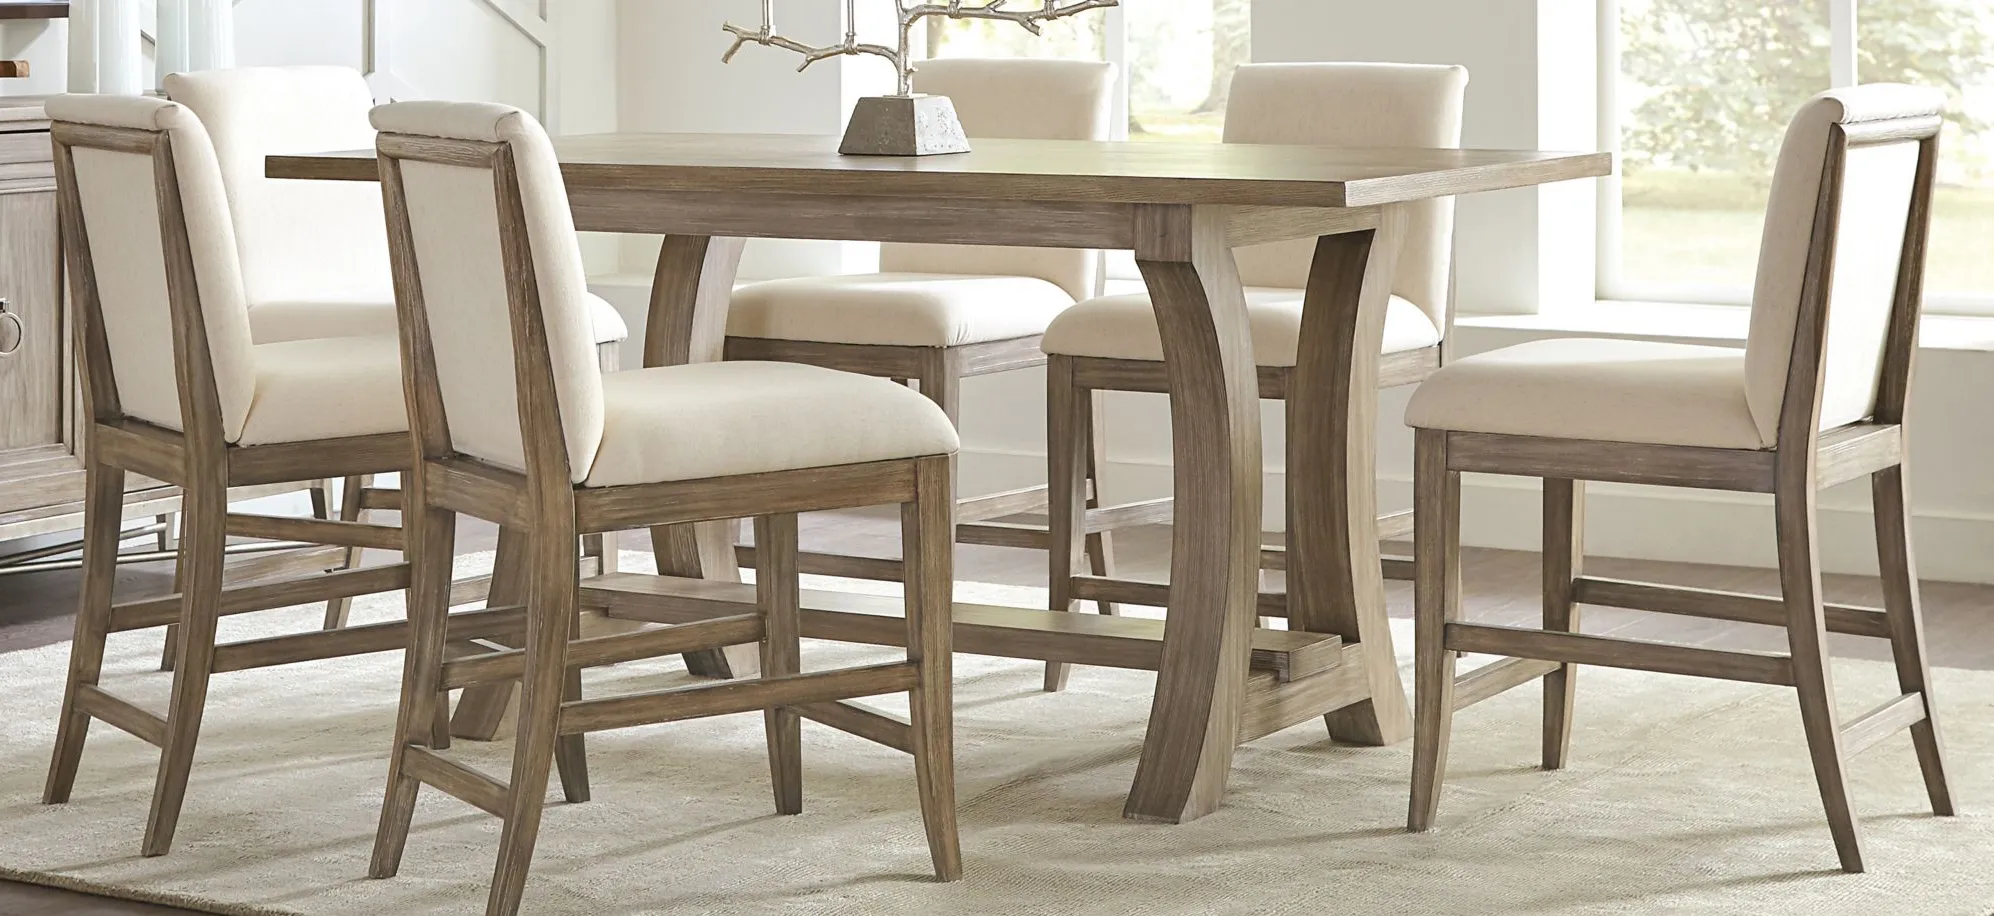 Torrin 7-pc. Counter-Height Dining Set in Natural by Riverside Furniture